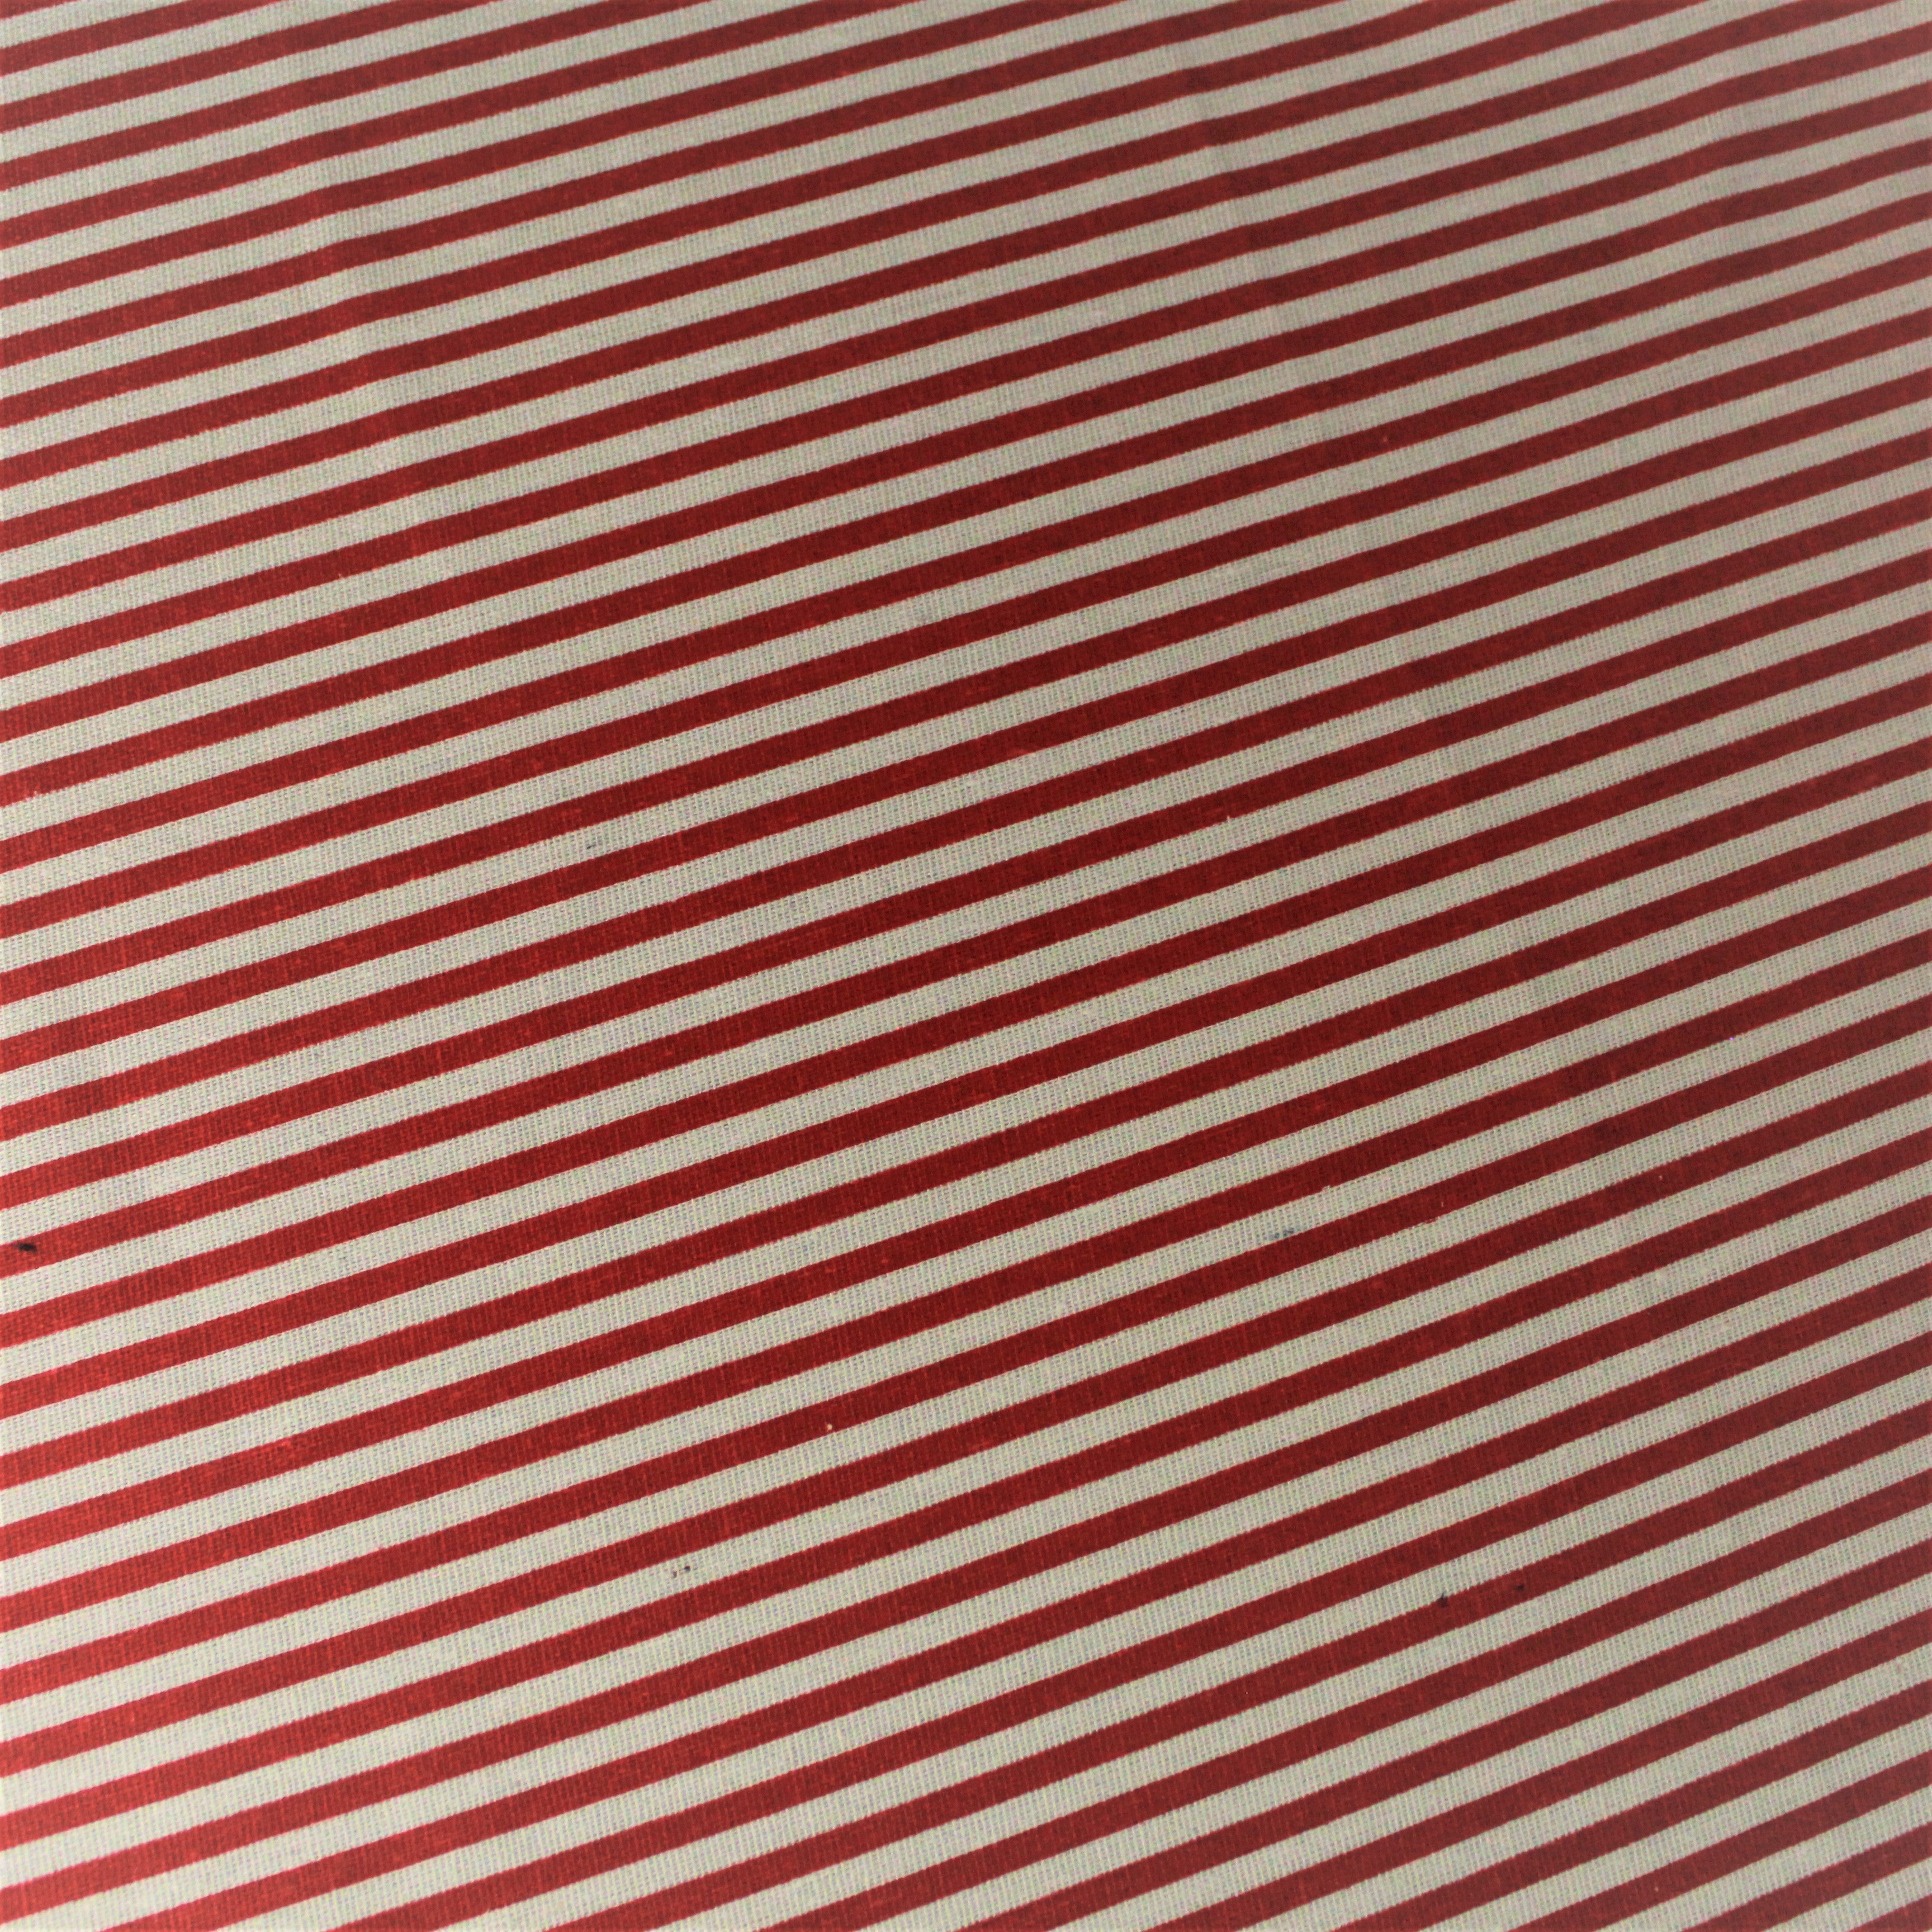 Premium Quality Printed Cotton Canvas 60"Wide Red Stripes